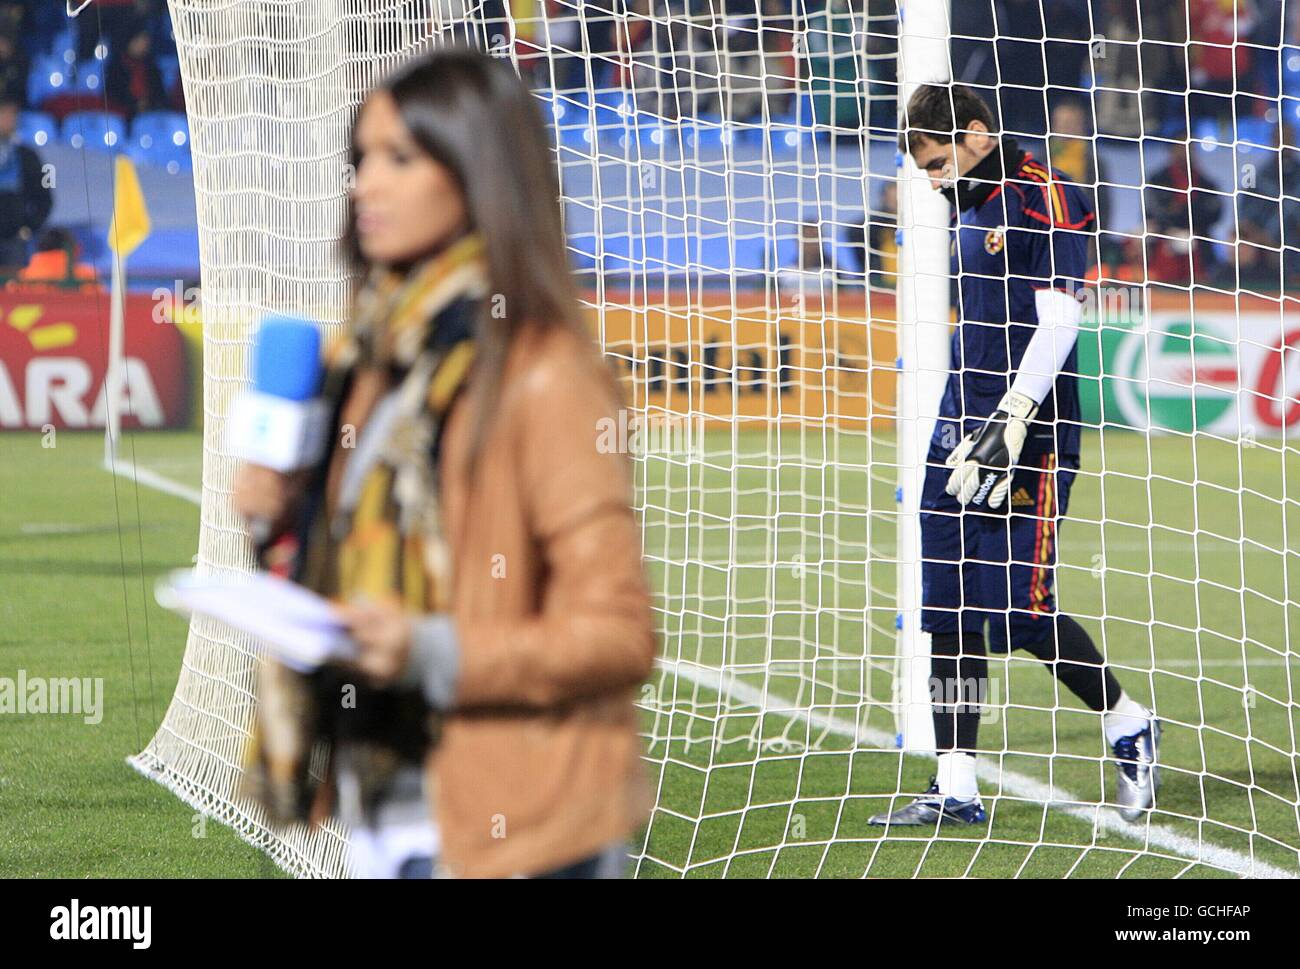 Soccer - 2010 FIFA World Cup South Africa - Group H - Chile v Spain - Loftus Versfeld Stadium. Spain goalkeeper Iker Casillas on the pitch with girlfriend Sara Carbonero prior to the game Stock Photo